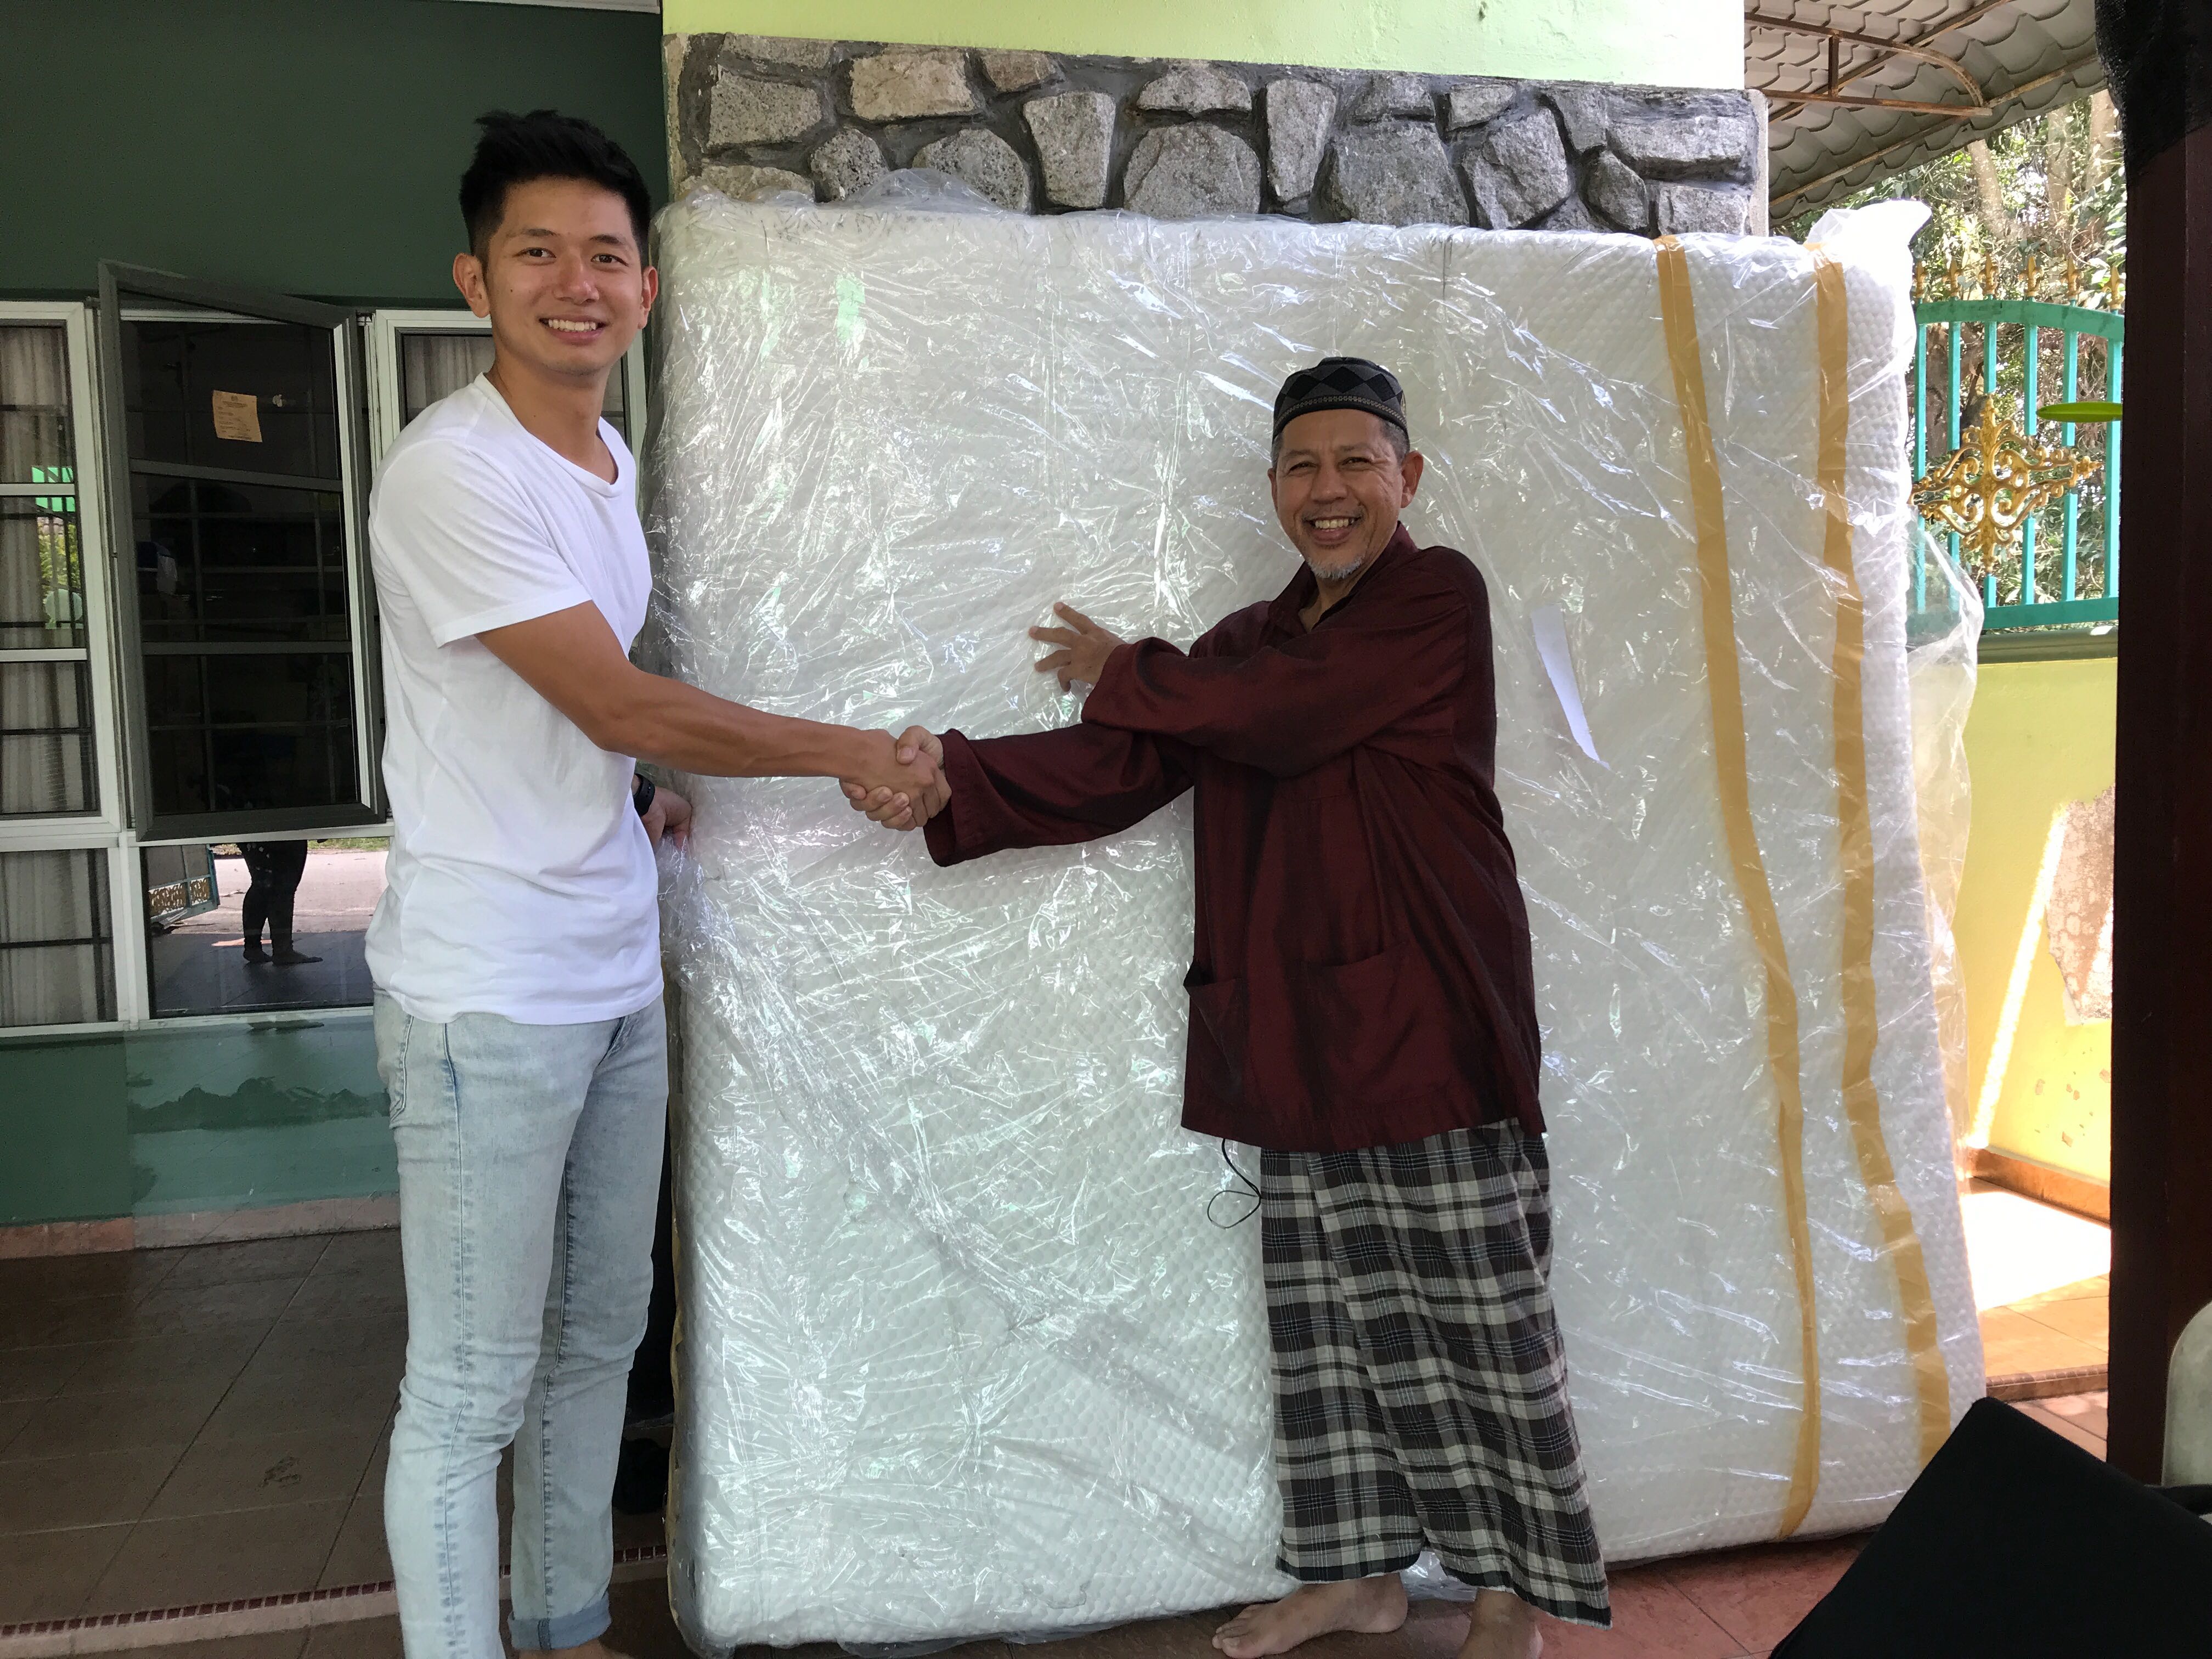 Sonno Community Outreach Program: Ever Wondered What We Do With Our Returned Mattresses?